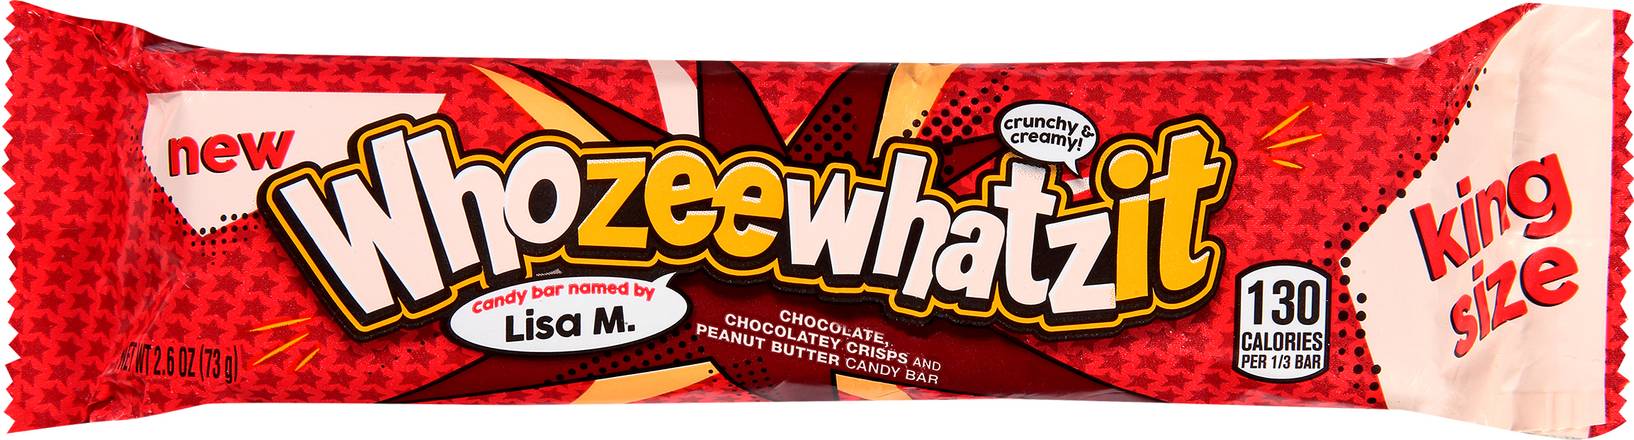 Whozeewhatzit King Size Candy Bar (chocolate chip ,peanut butter)